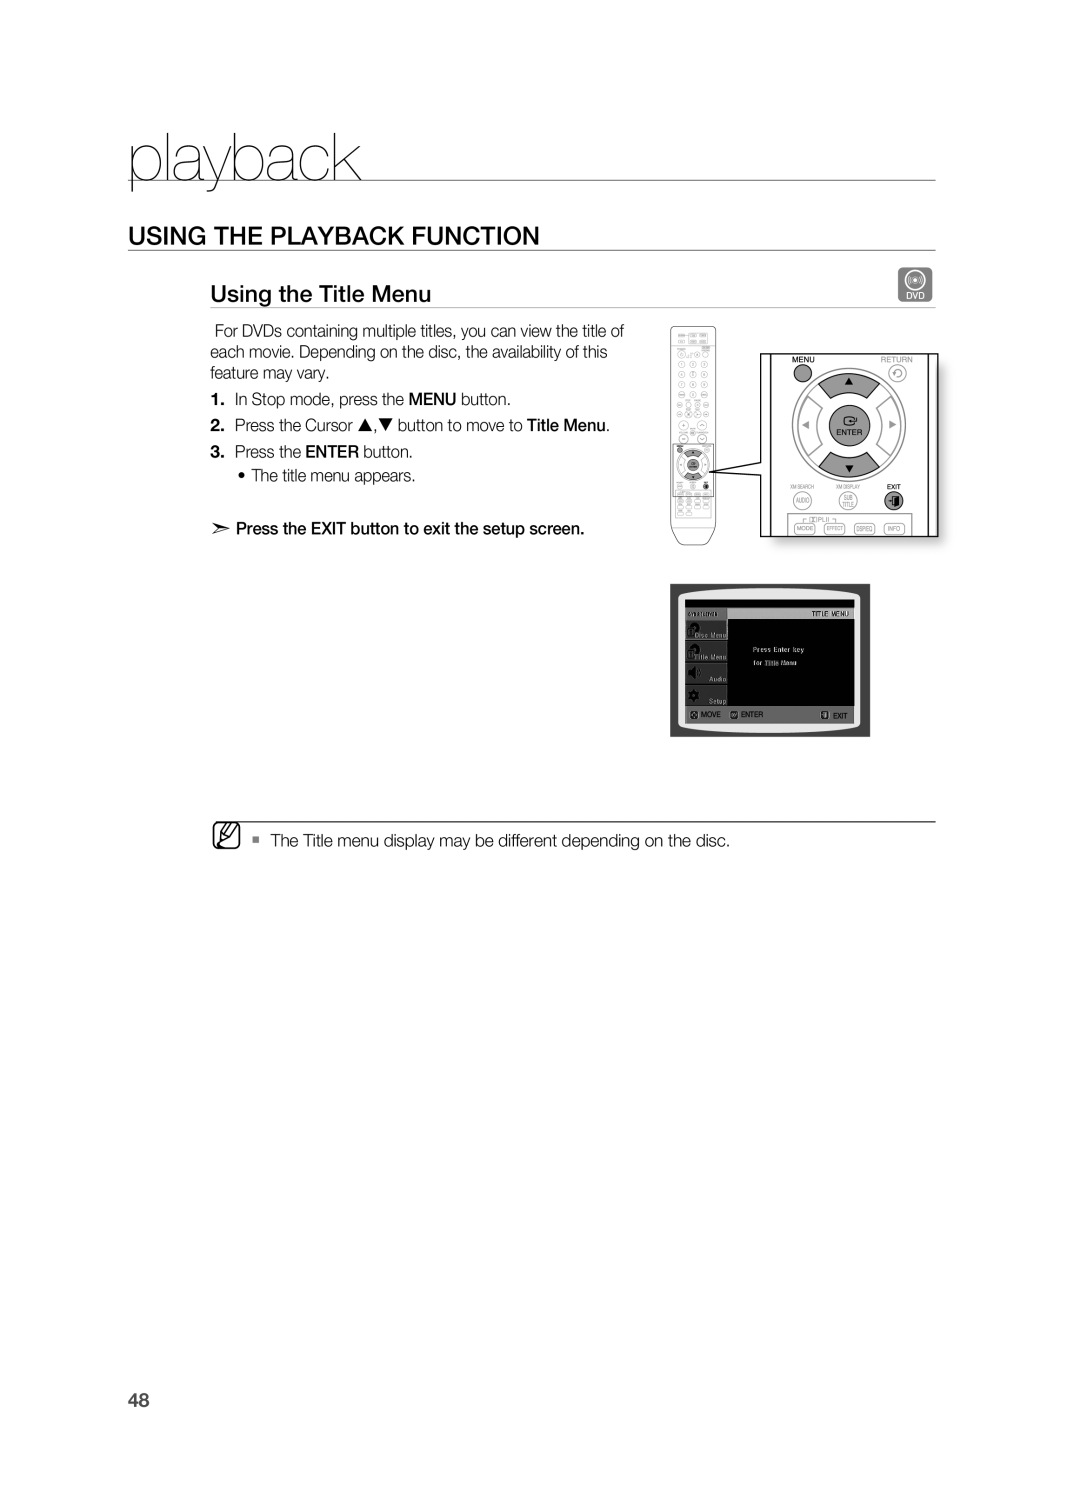 Samsung HT-Z510 manual playback, USINg THE PLAYBACK FUNCTION, Using the Title Menu 